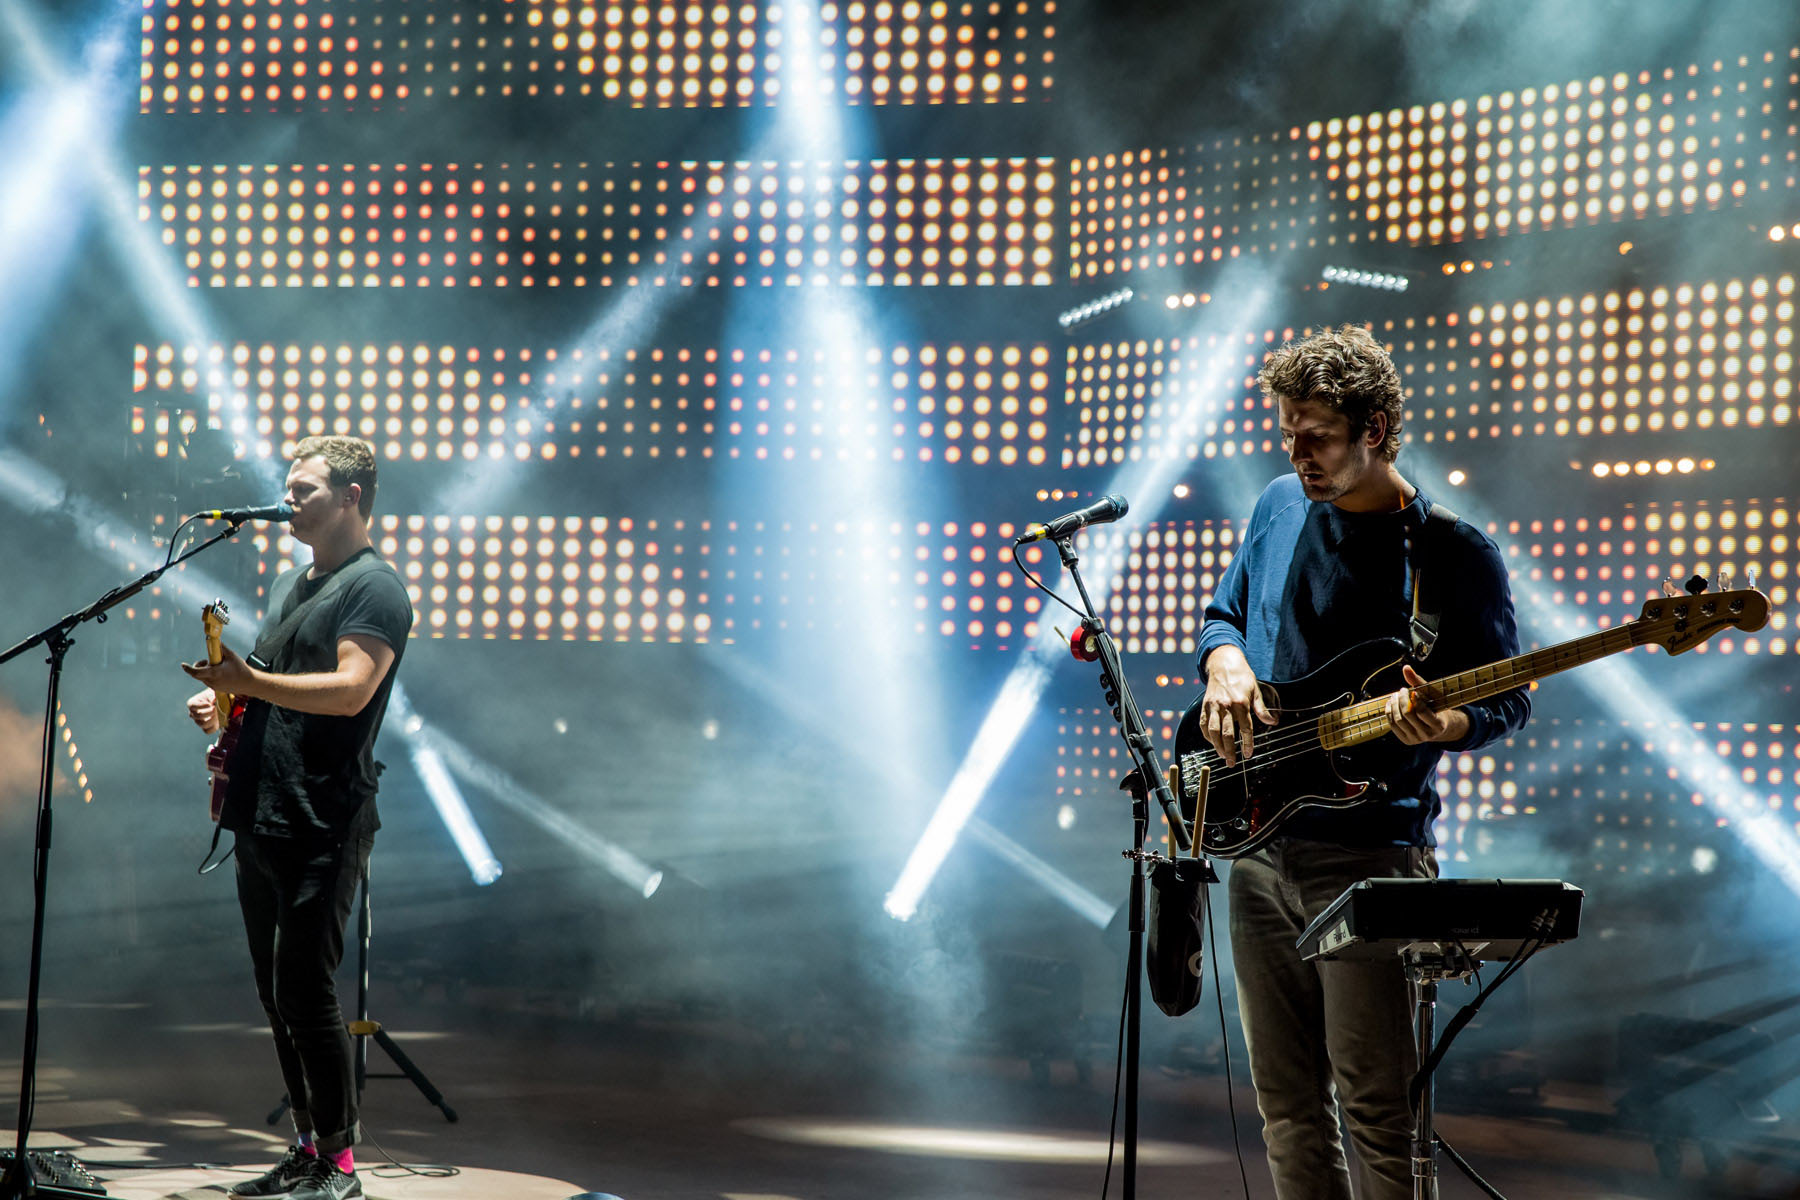 altJ Tour U.S. with Custom LED Solution from XL Video